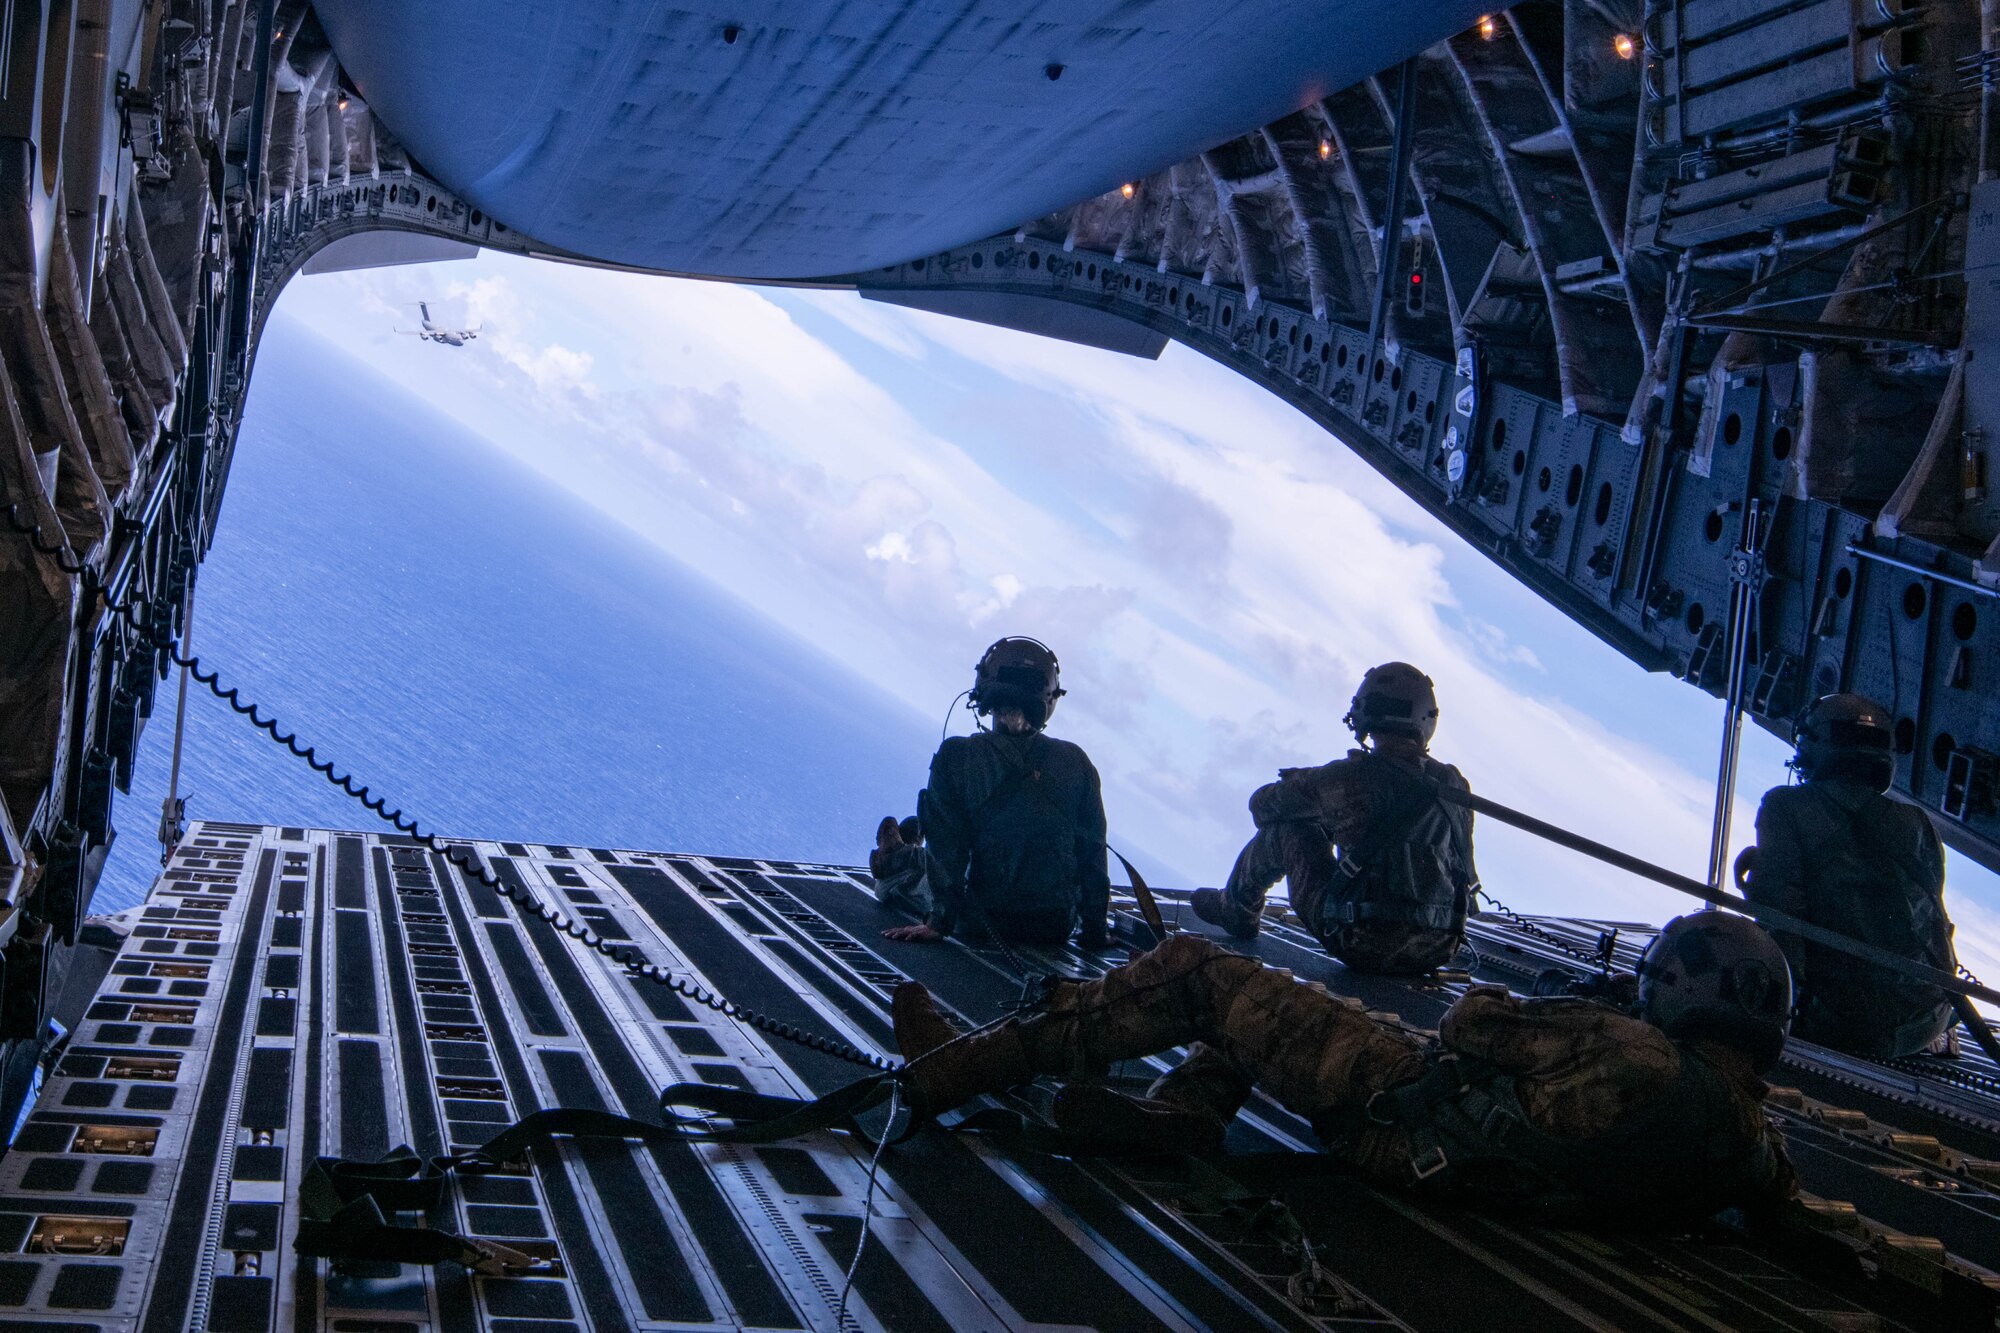 Coalition loadmasters look out over the Pacific Ocean from an Australian C-17 during a Joint airdrop
near Andersen Air Force Base, Guam on July 12, 2023. This airdrop was part of Mobility Guardian 23
and showed how Allies and partners are capable of resupplying remote areas. MG23 is a mobility
exercise held across a 3,000-mile area intended to deepen interoperability with U.S. Allies and
partners, bolstering the collective ability to support a free and open Indo-Pacific area. (U.S. Air Force
photo by A1C Caleb Parker)